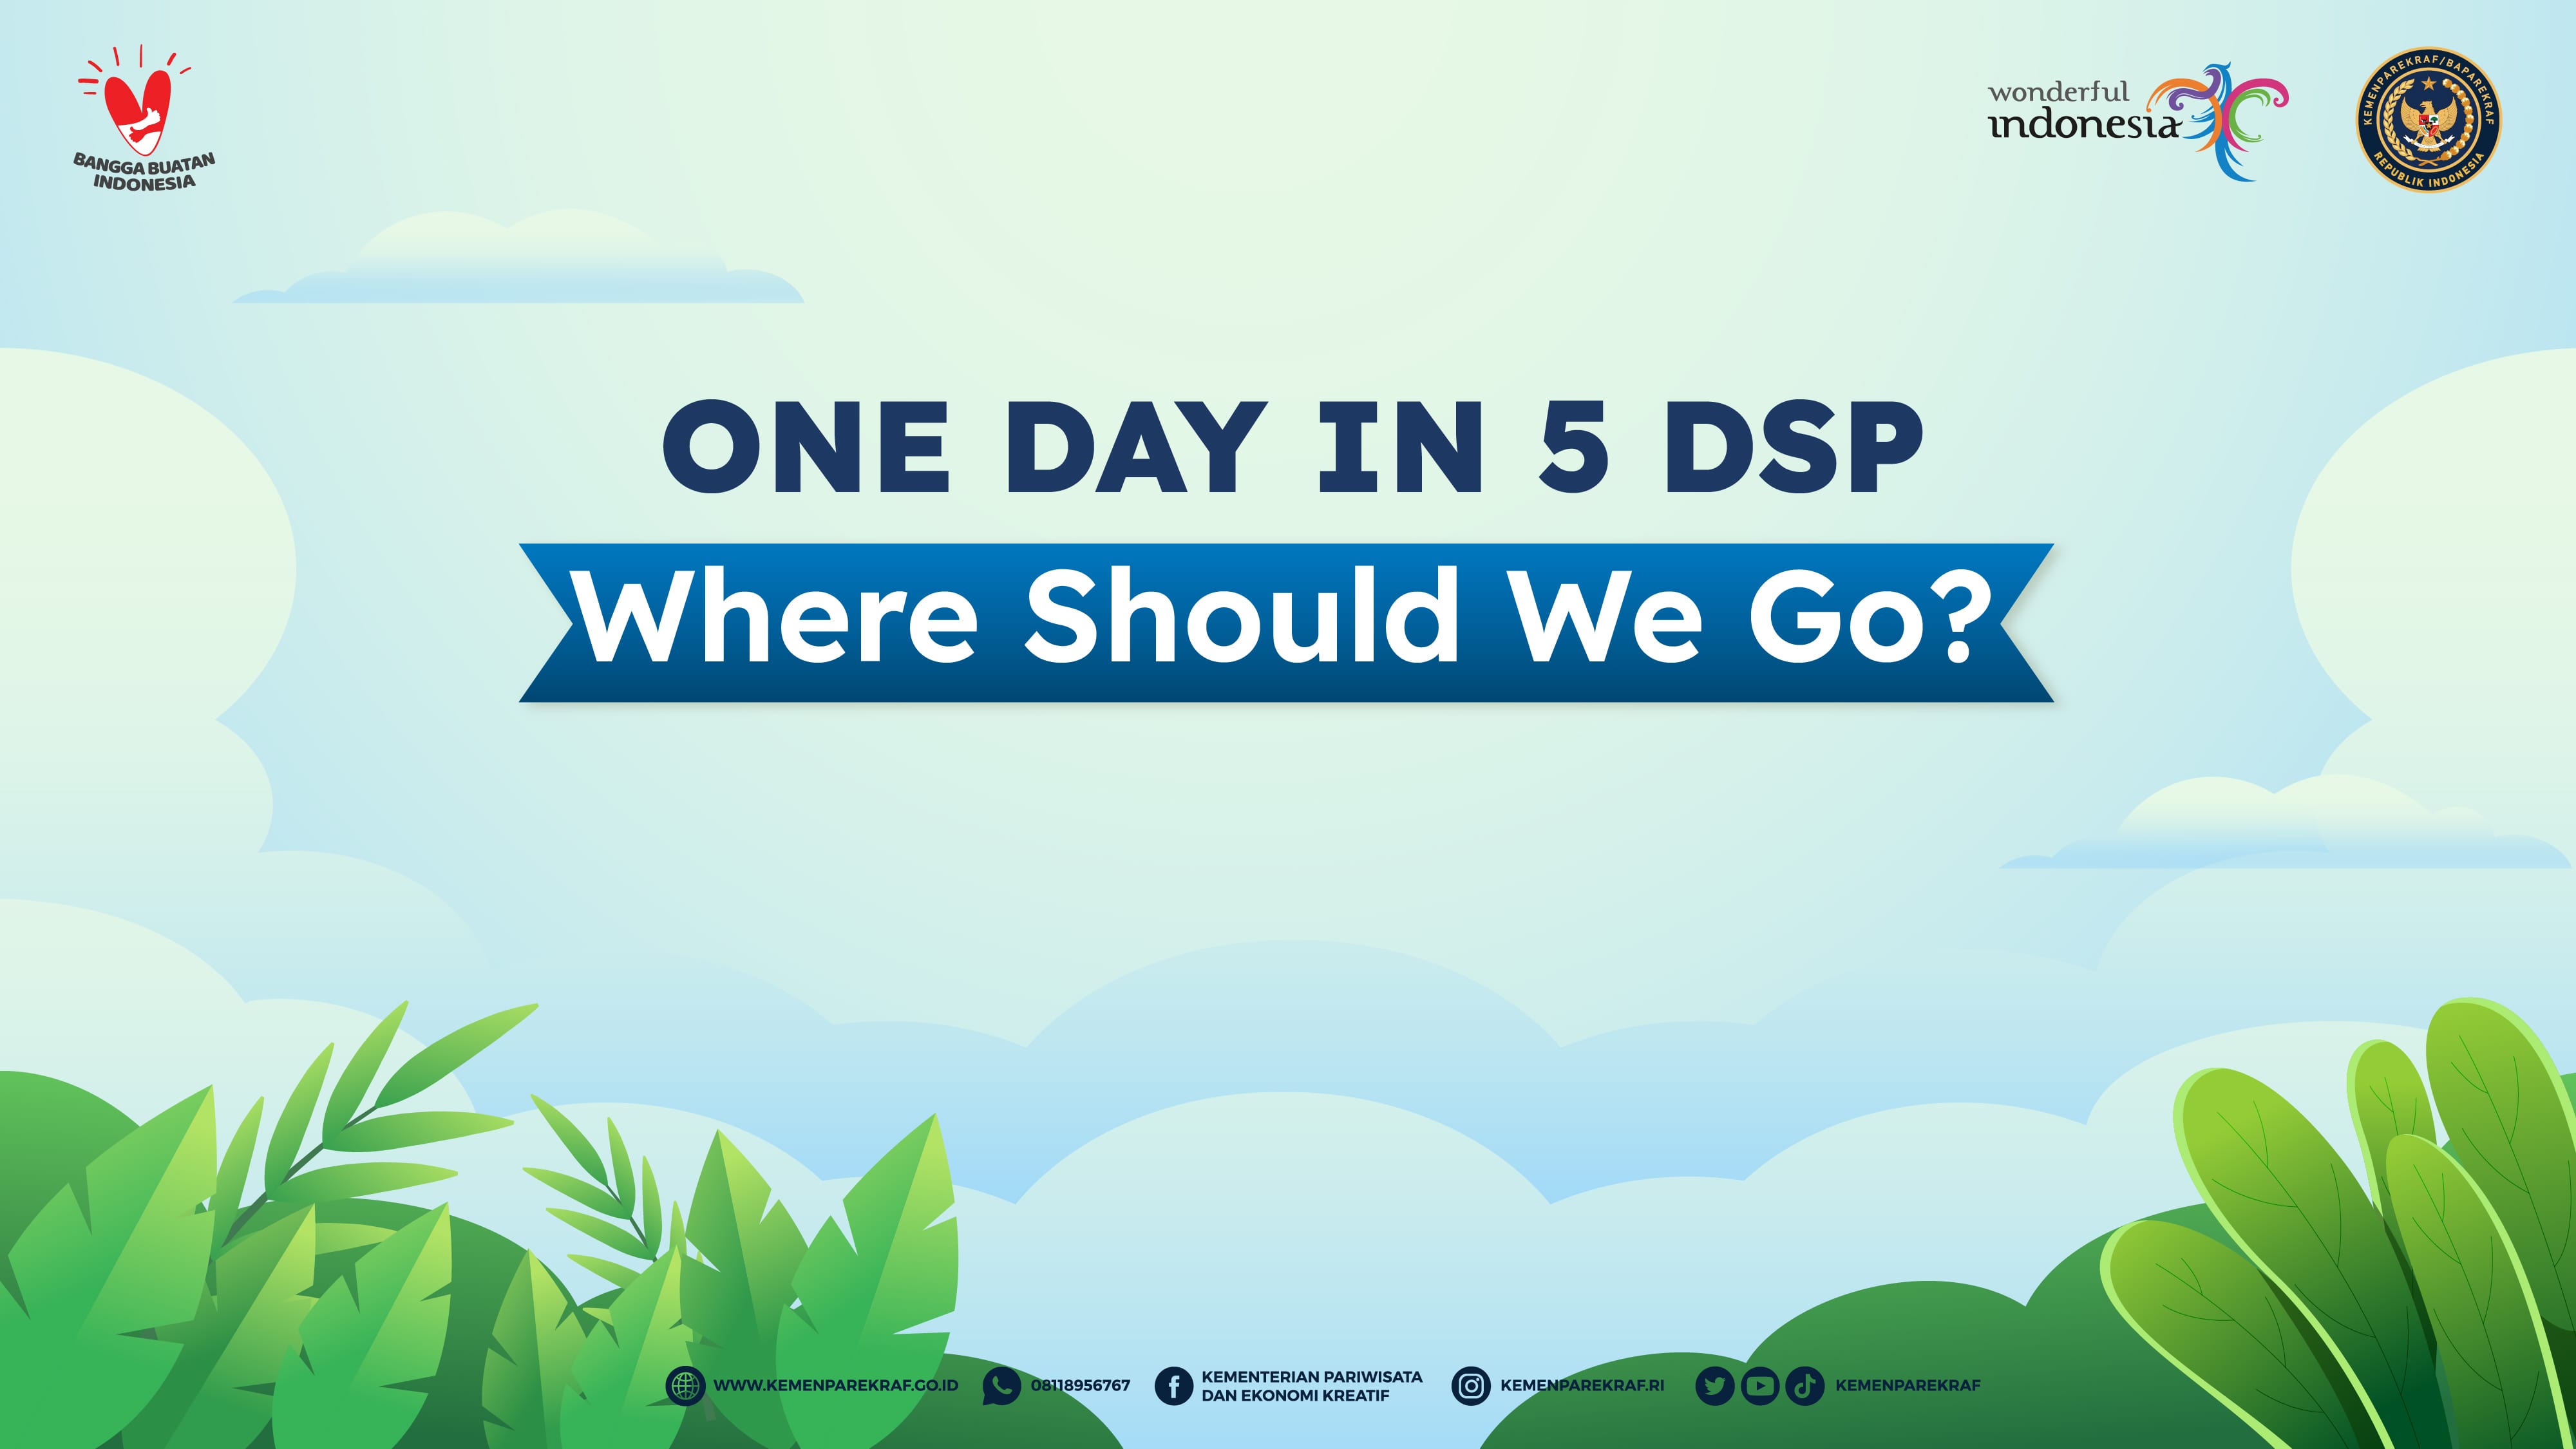 One Day in 5 DSP, Where Should We Go?